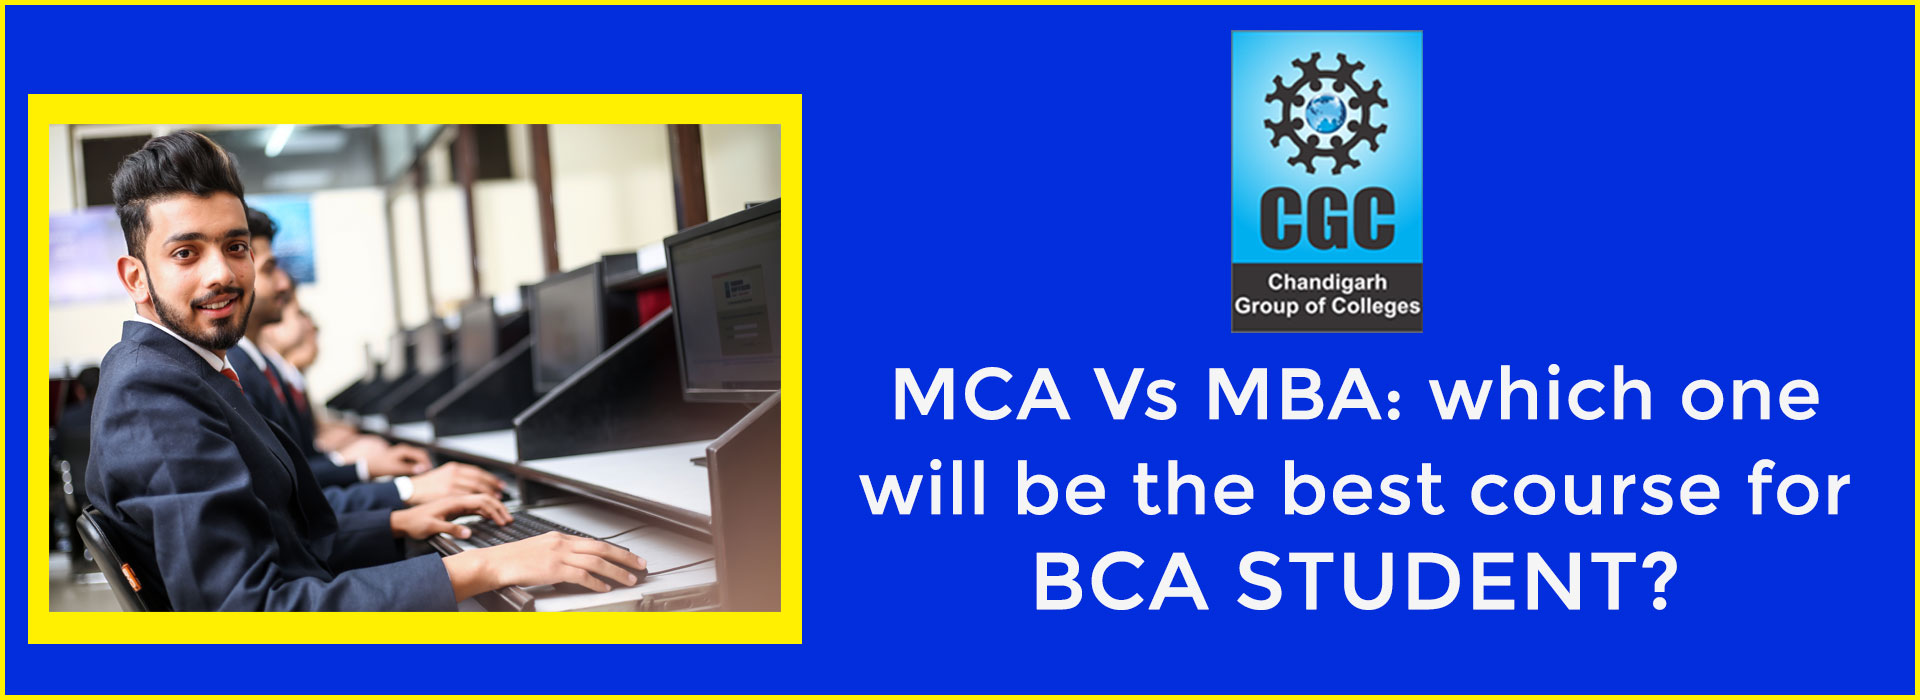 MCA Vs MBA: which one will be the best course for BCA STUDENT? 